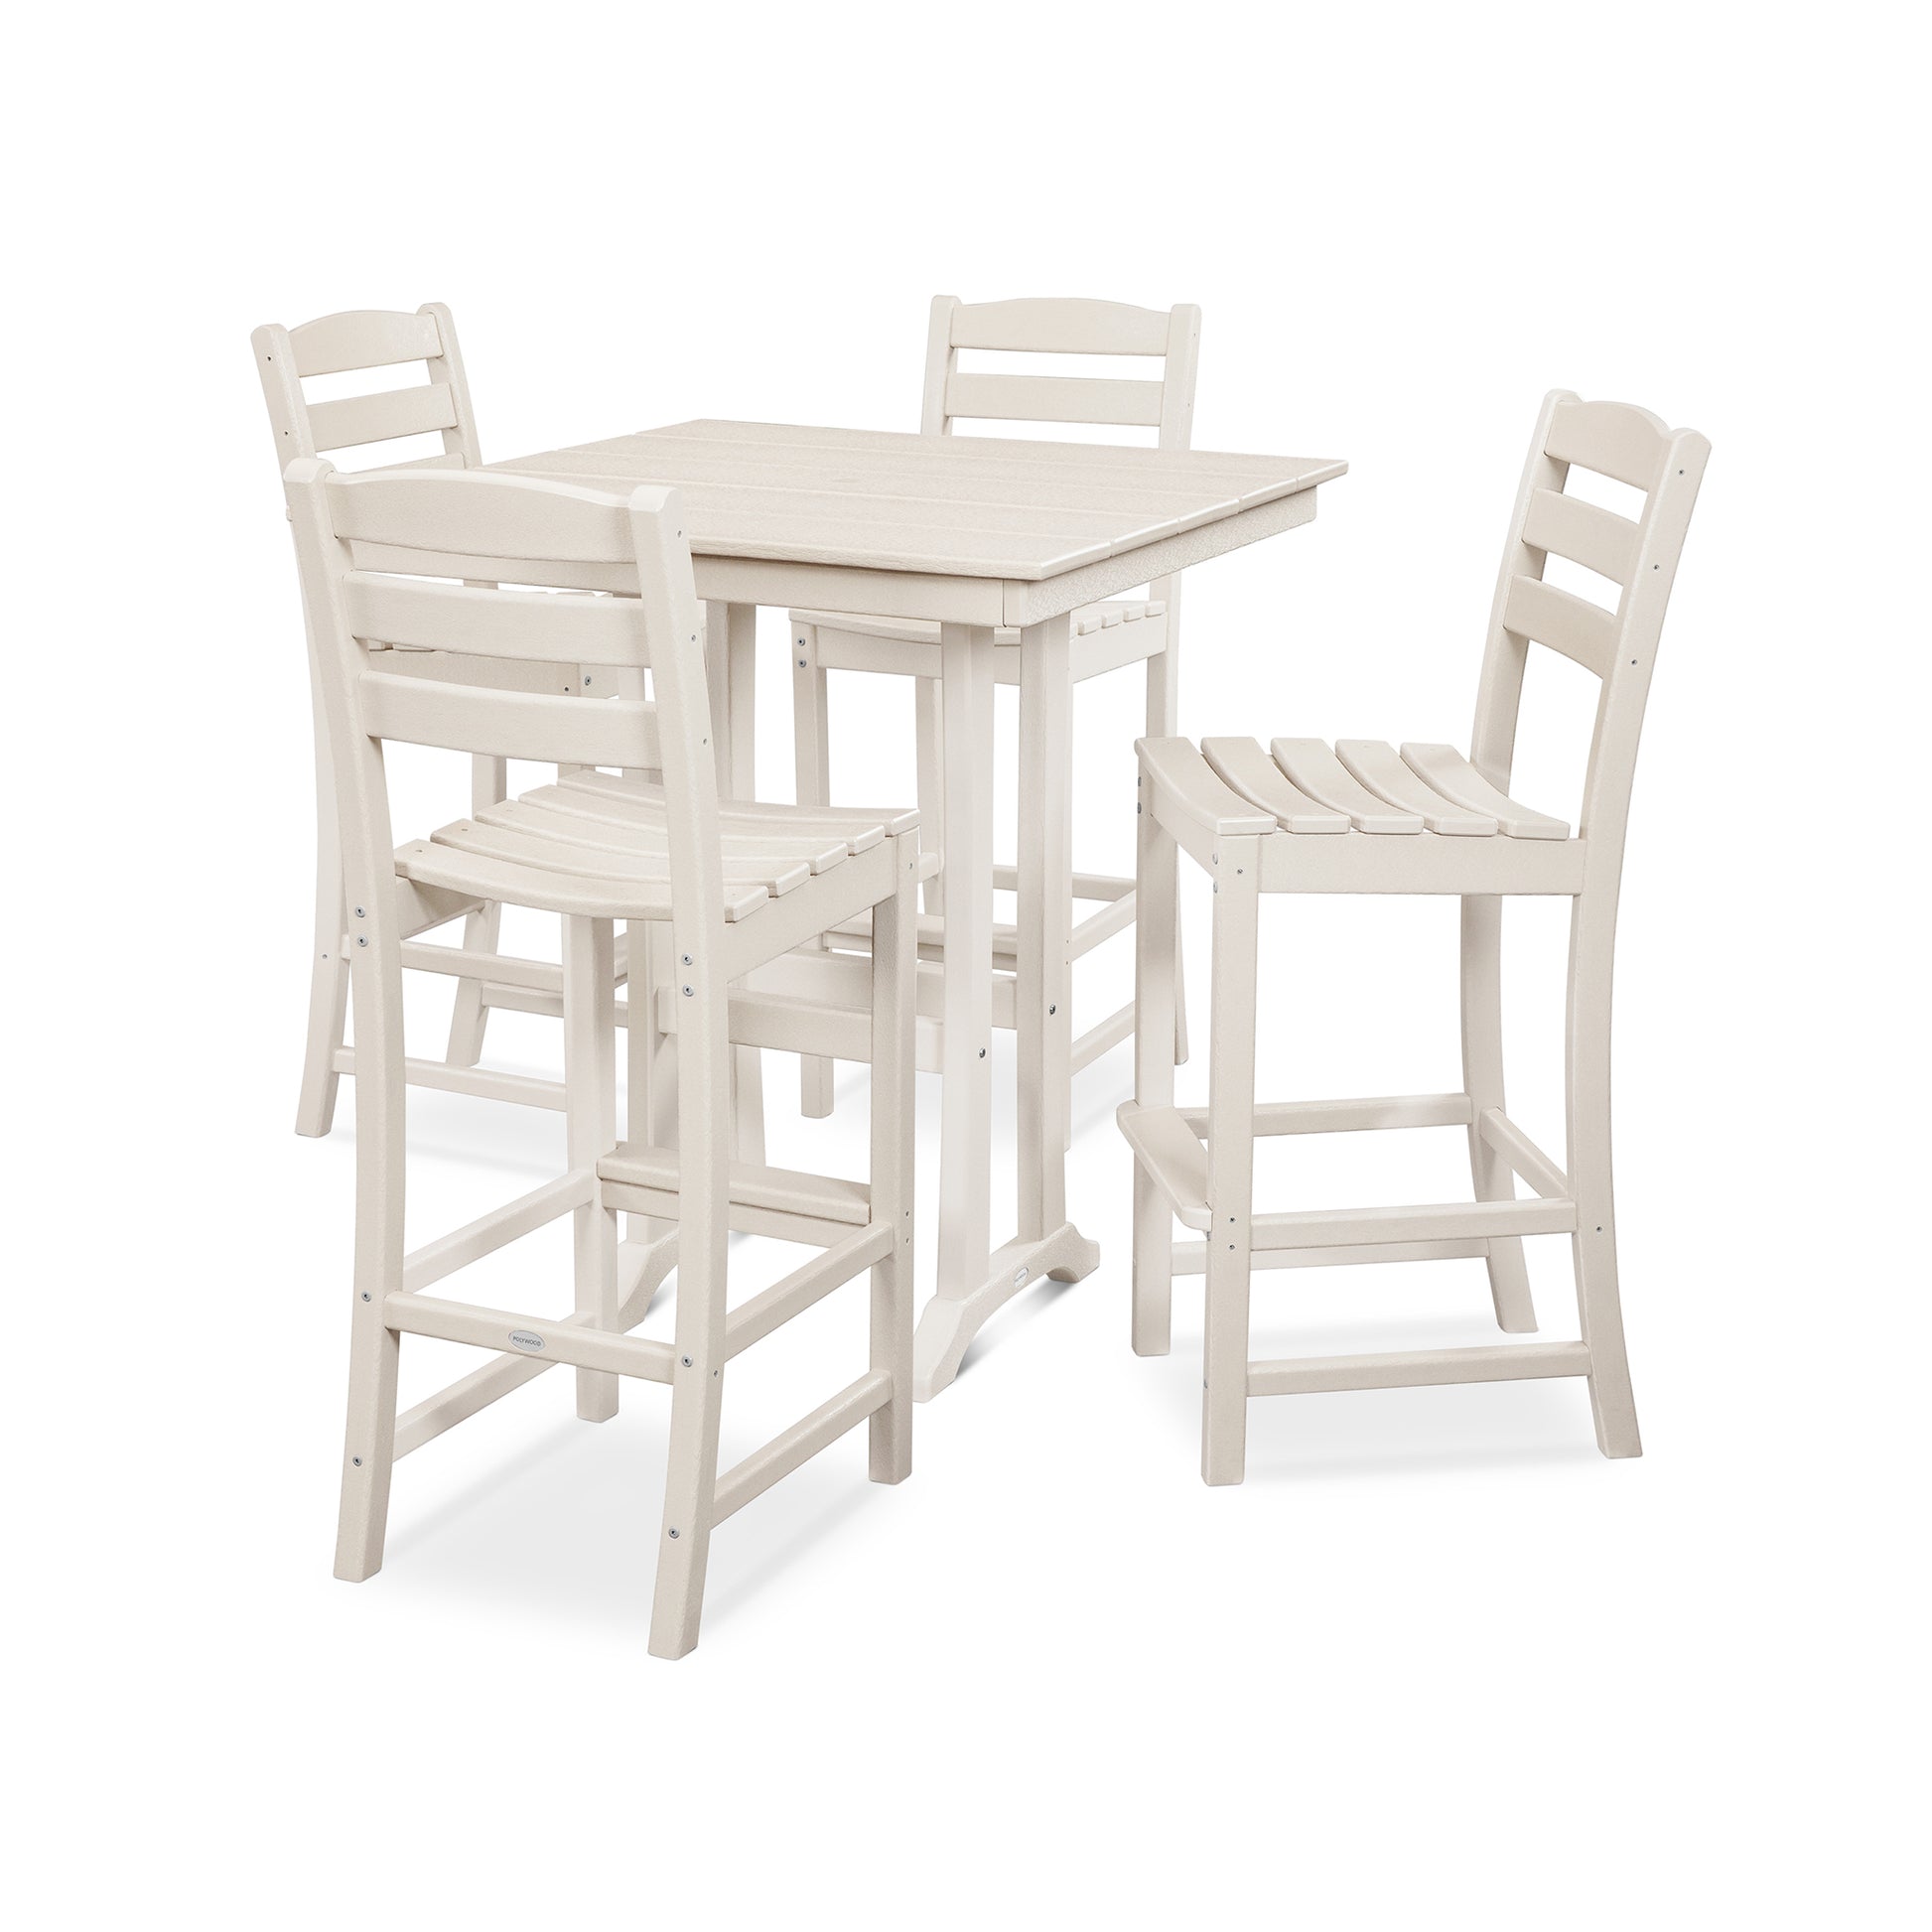 A modern all-weather outdoor bar set featuring a tall, square white table and three matching bar stools, each piece is constructed from POLYWOOD La Casa Cafe 5-Piece Farmhouse Trestle Bar Set, designed for patio or garden use.